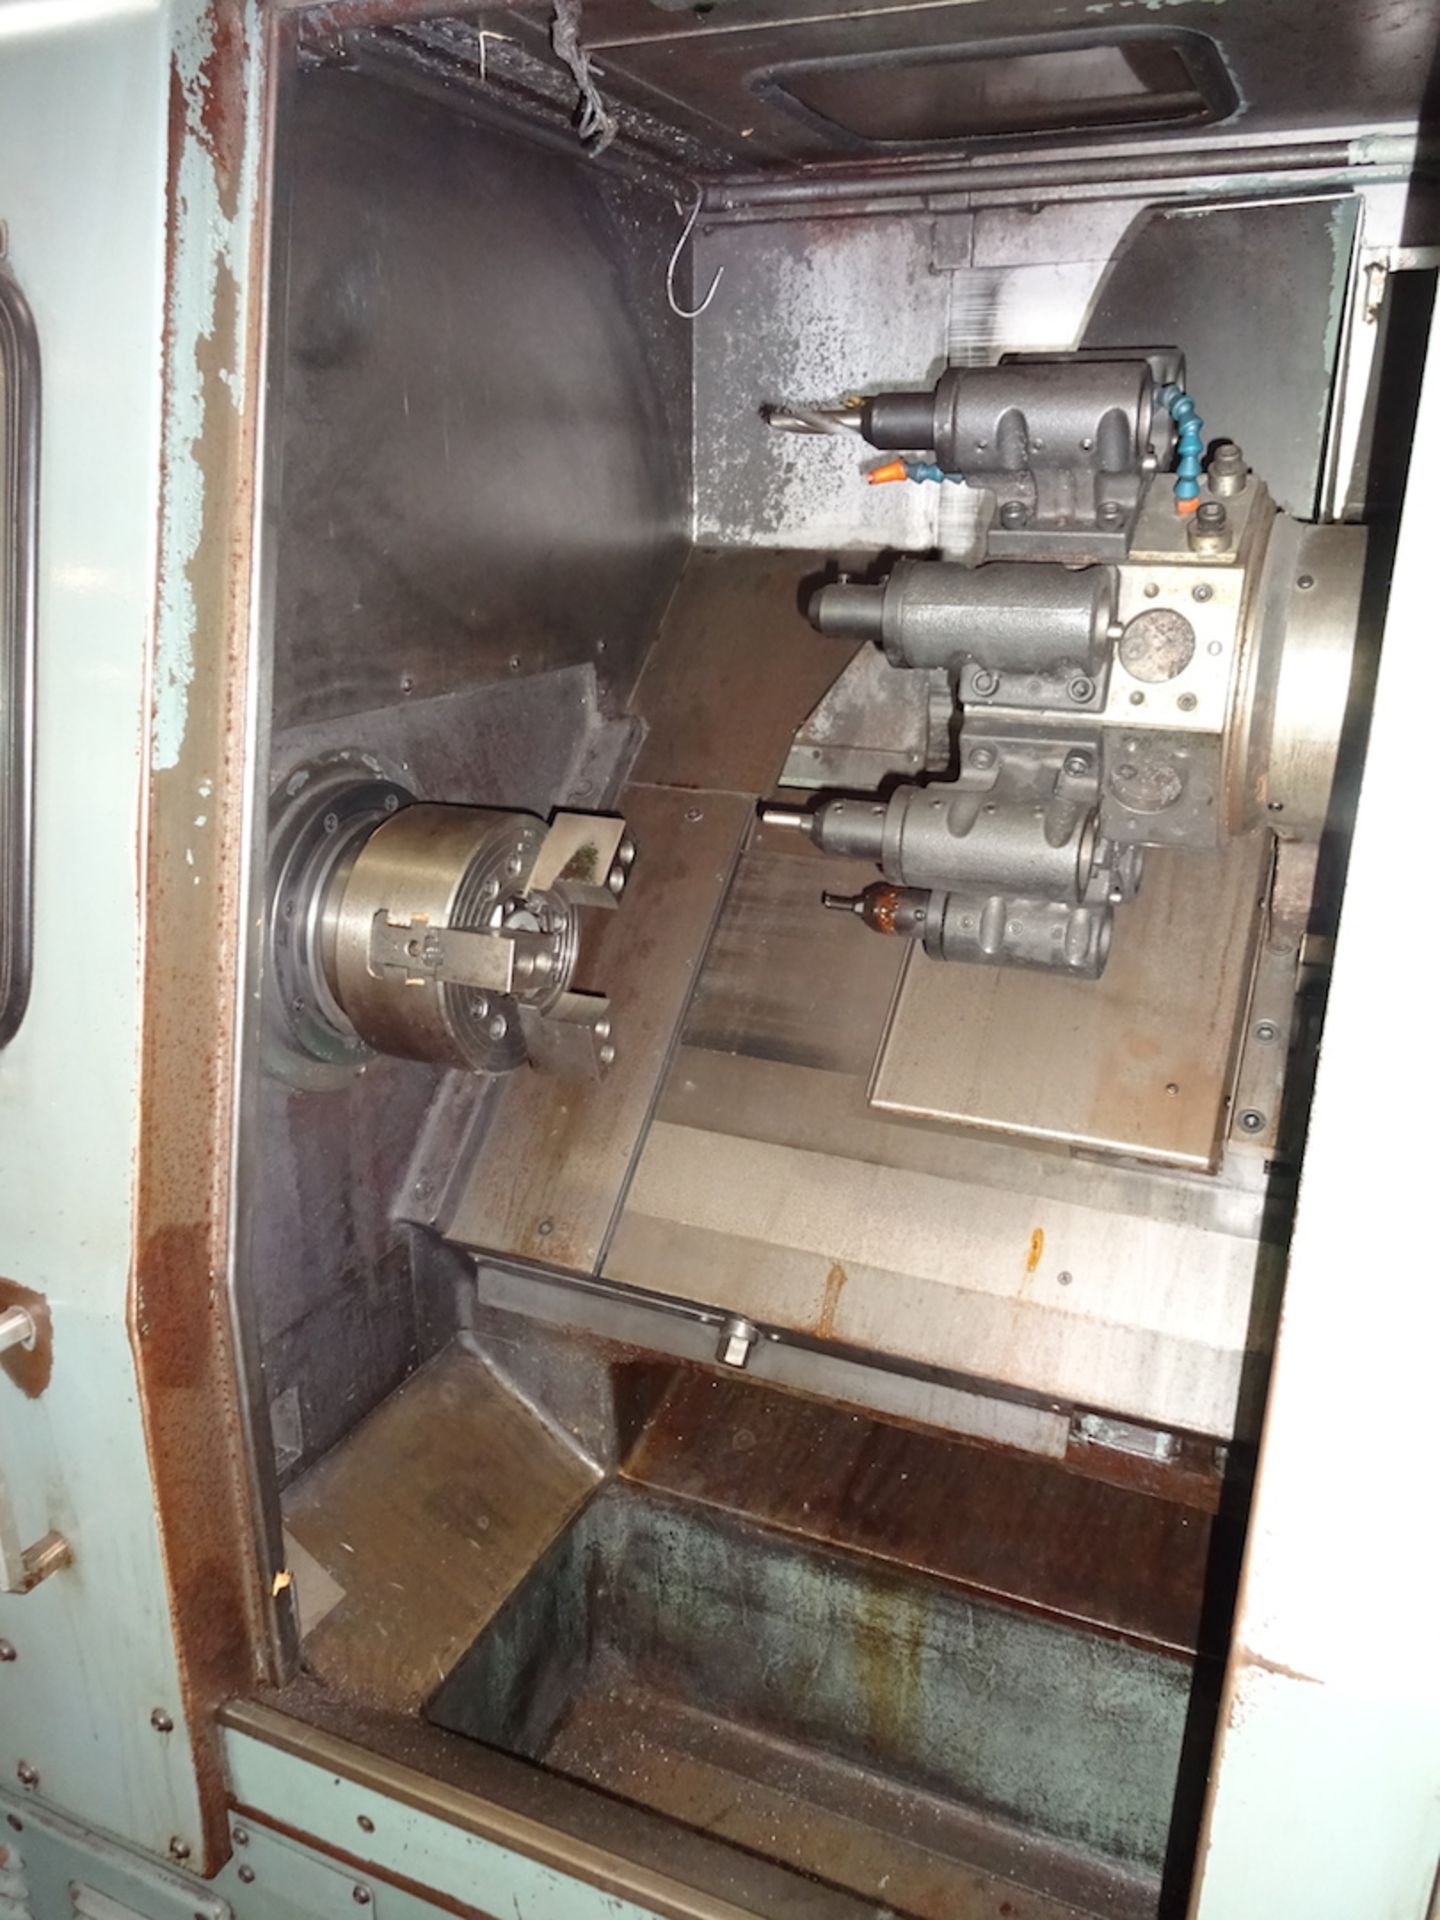 Mori Seiki Model SL-3A CNC Turning Center, S/N 1686, 8 in. 3-Jaw Chuck, 8 Station Turret, Tailstock - Image 12 of 14